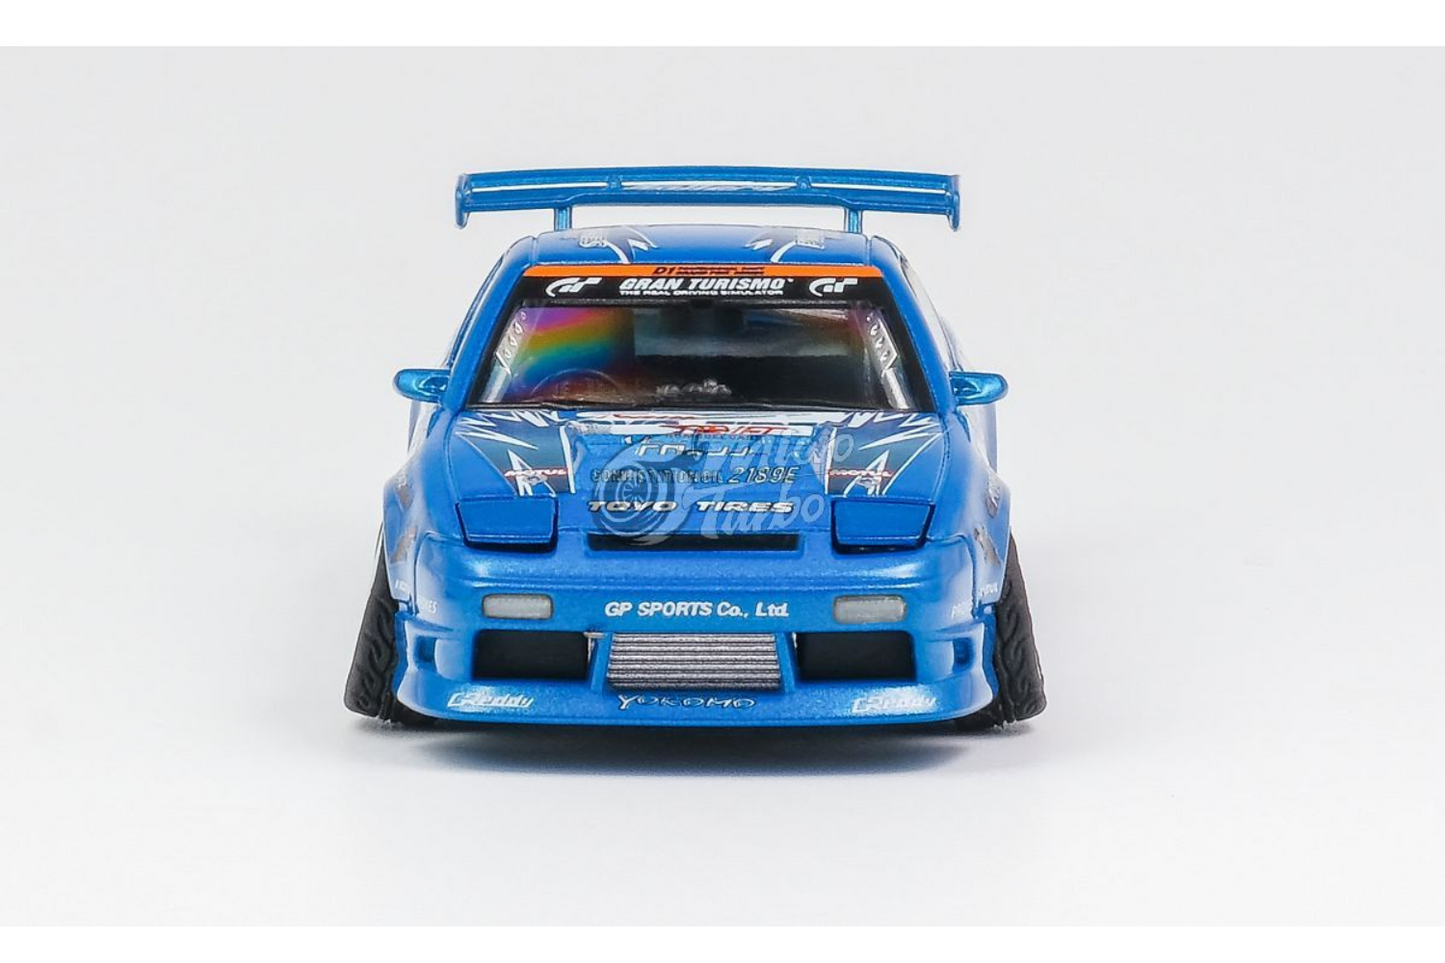 Micro Turbo 1/64 Nissan 180SX in Toyo Tires Drift Livery